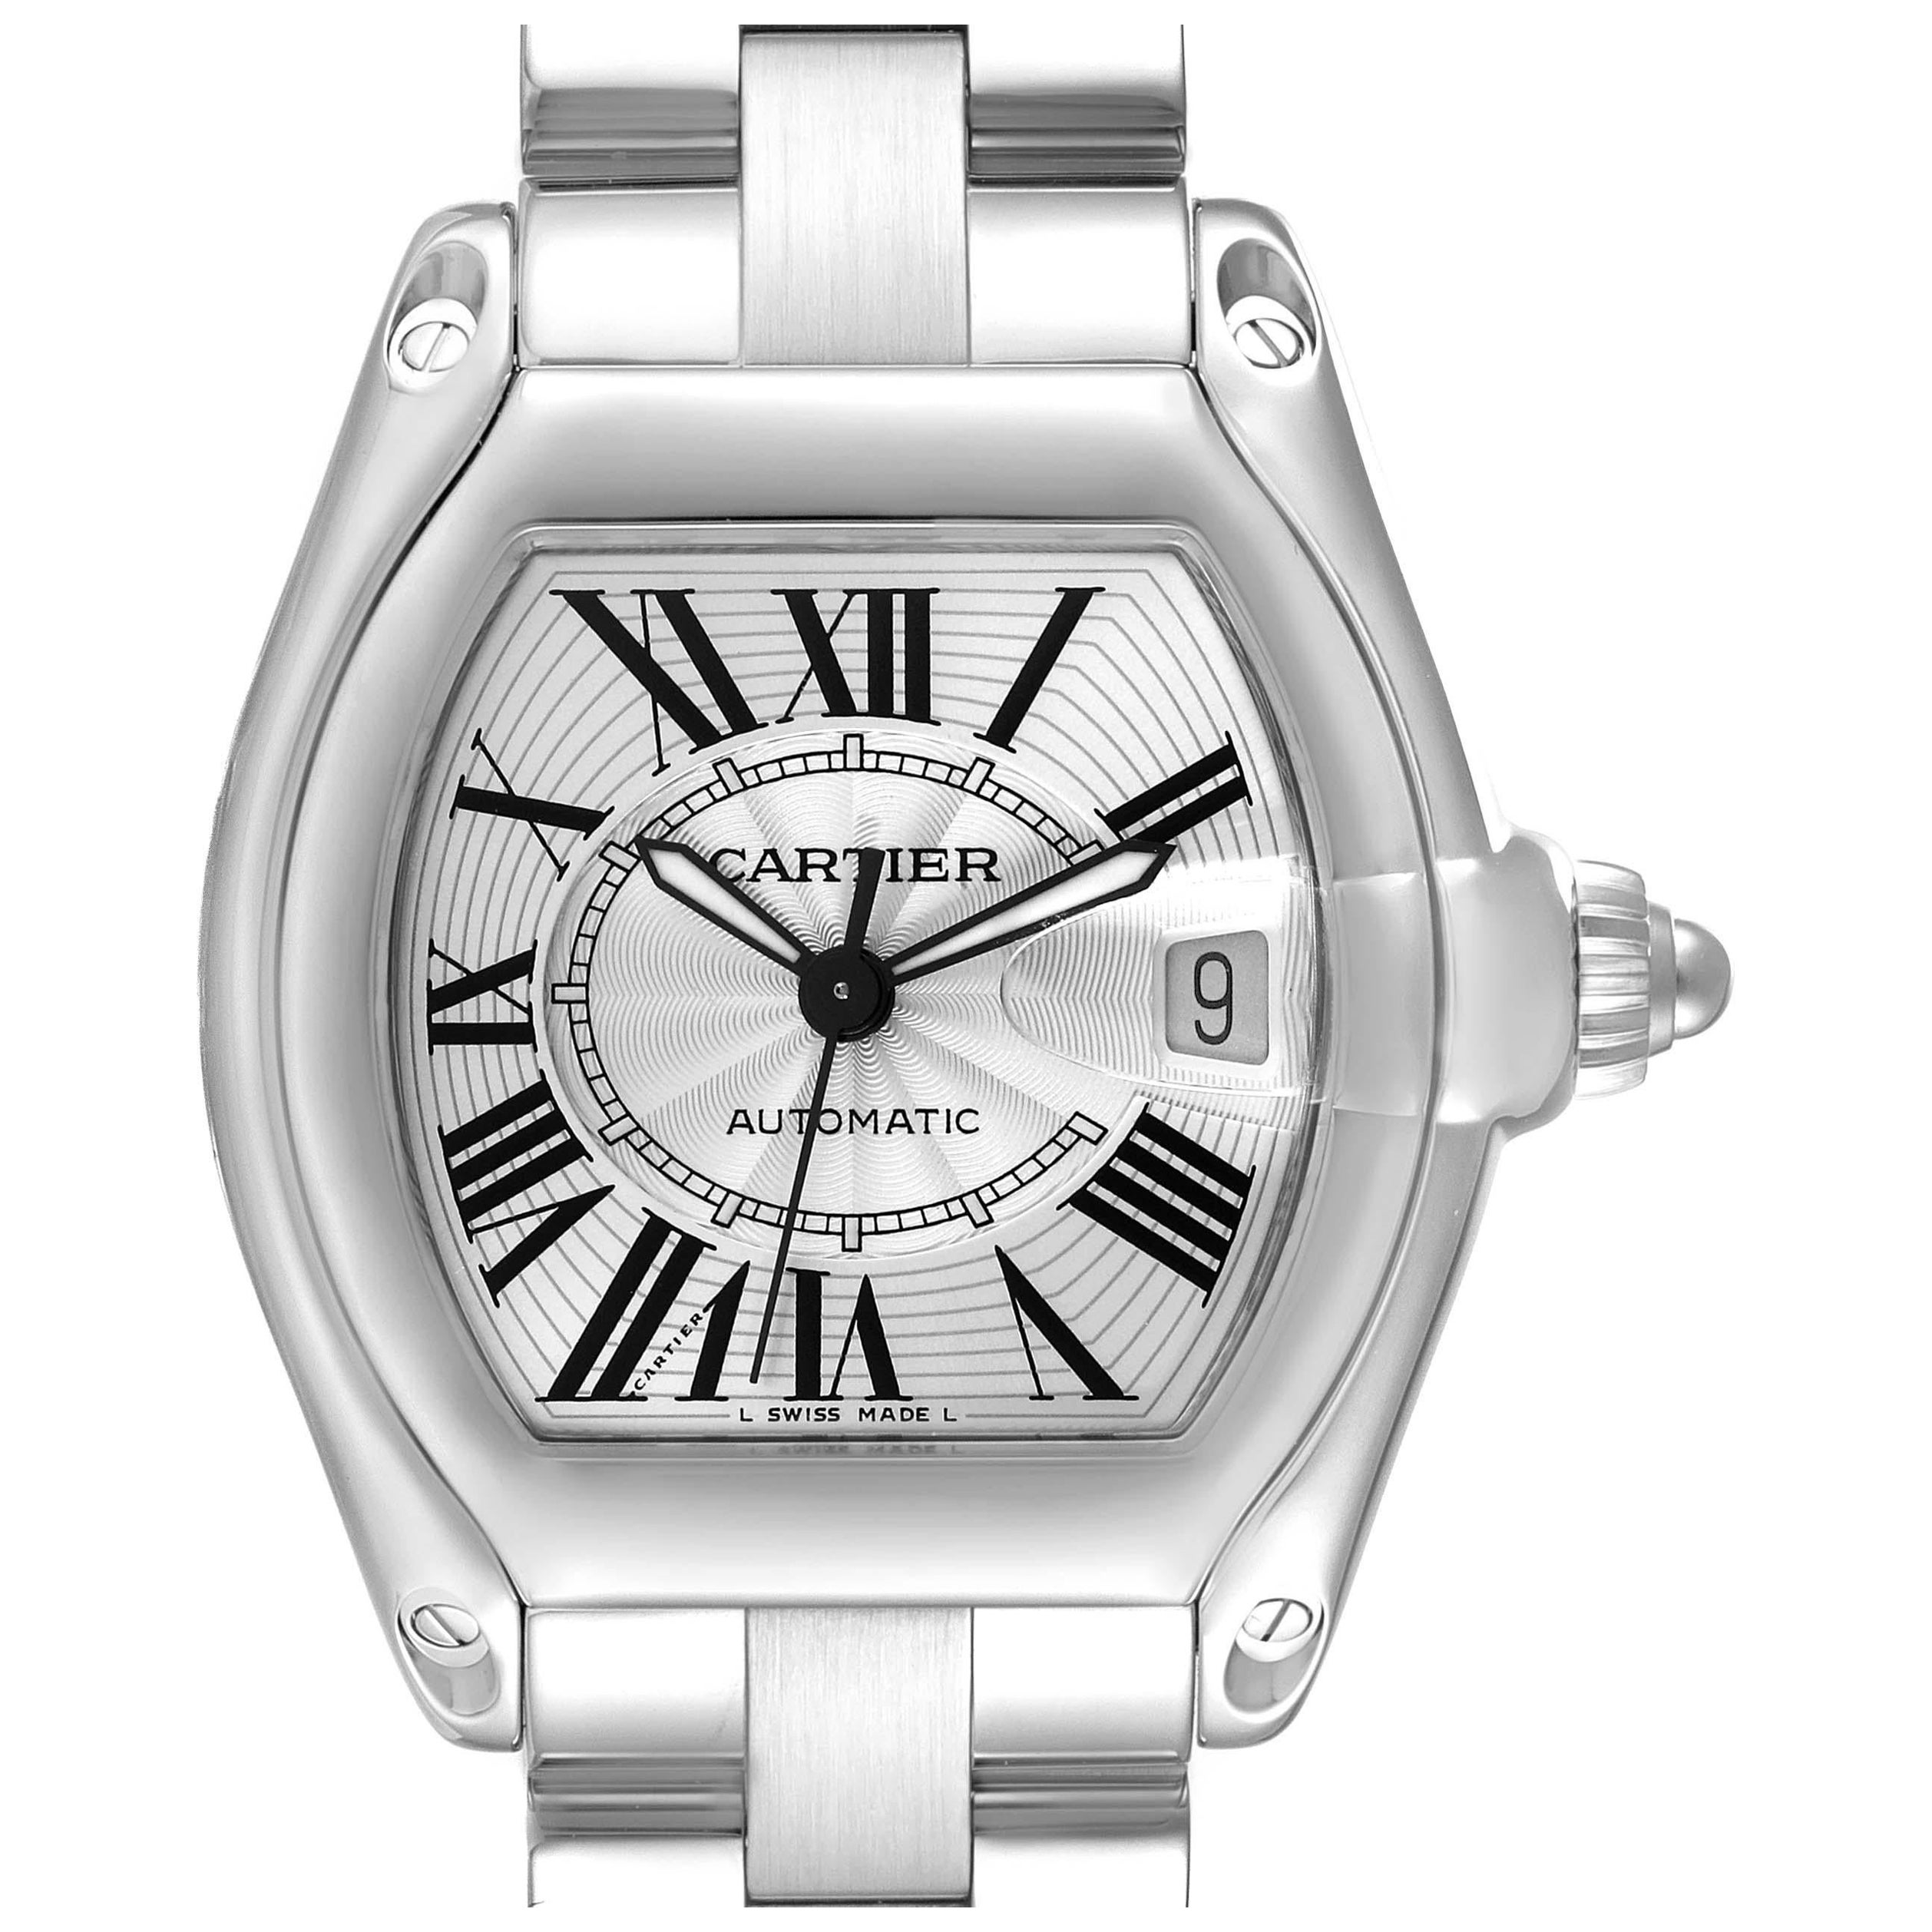 Does Cartier sell silver items?